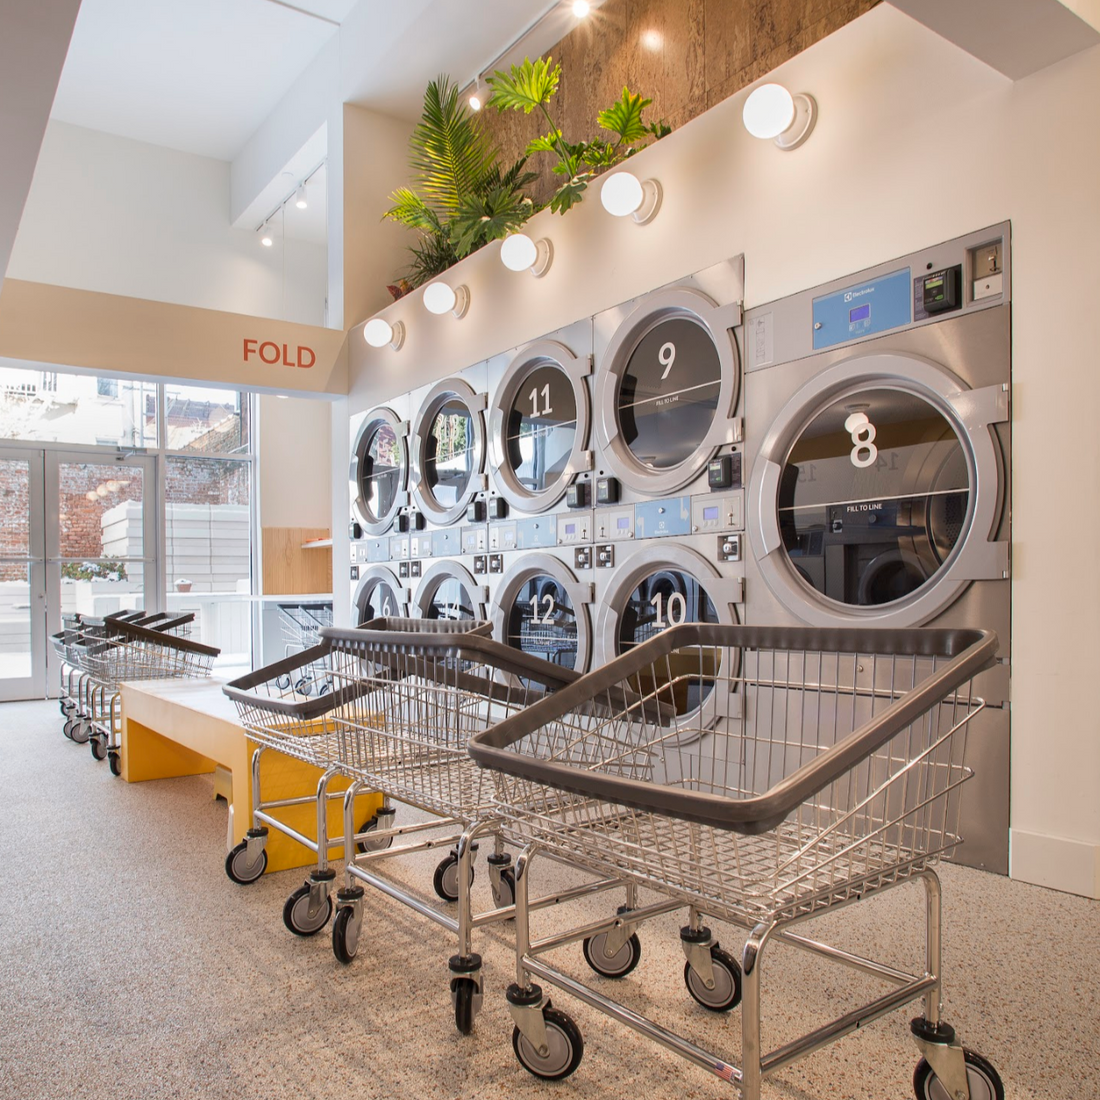 Tips for starting an eco-friendly laundromat